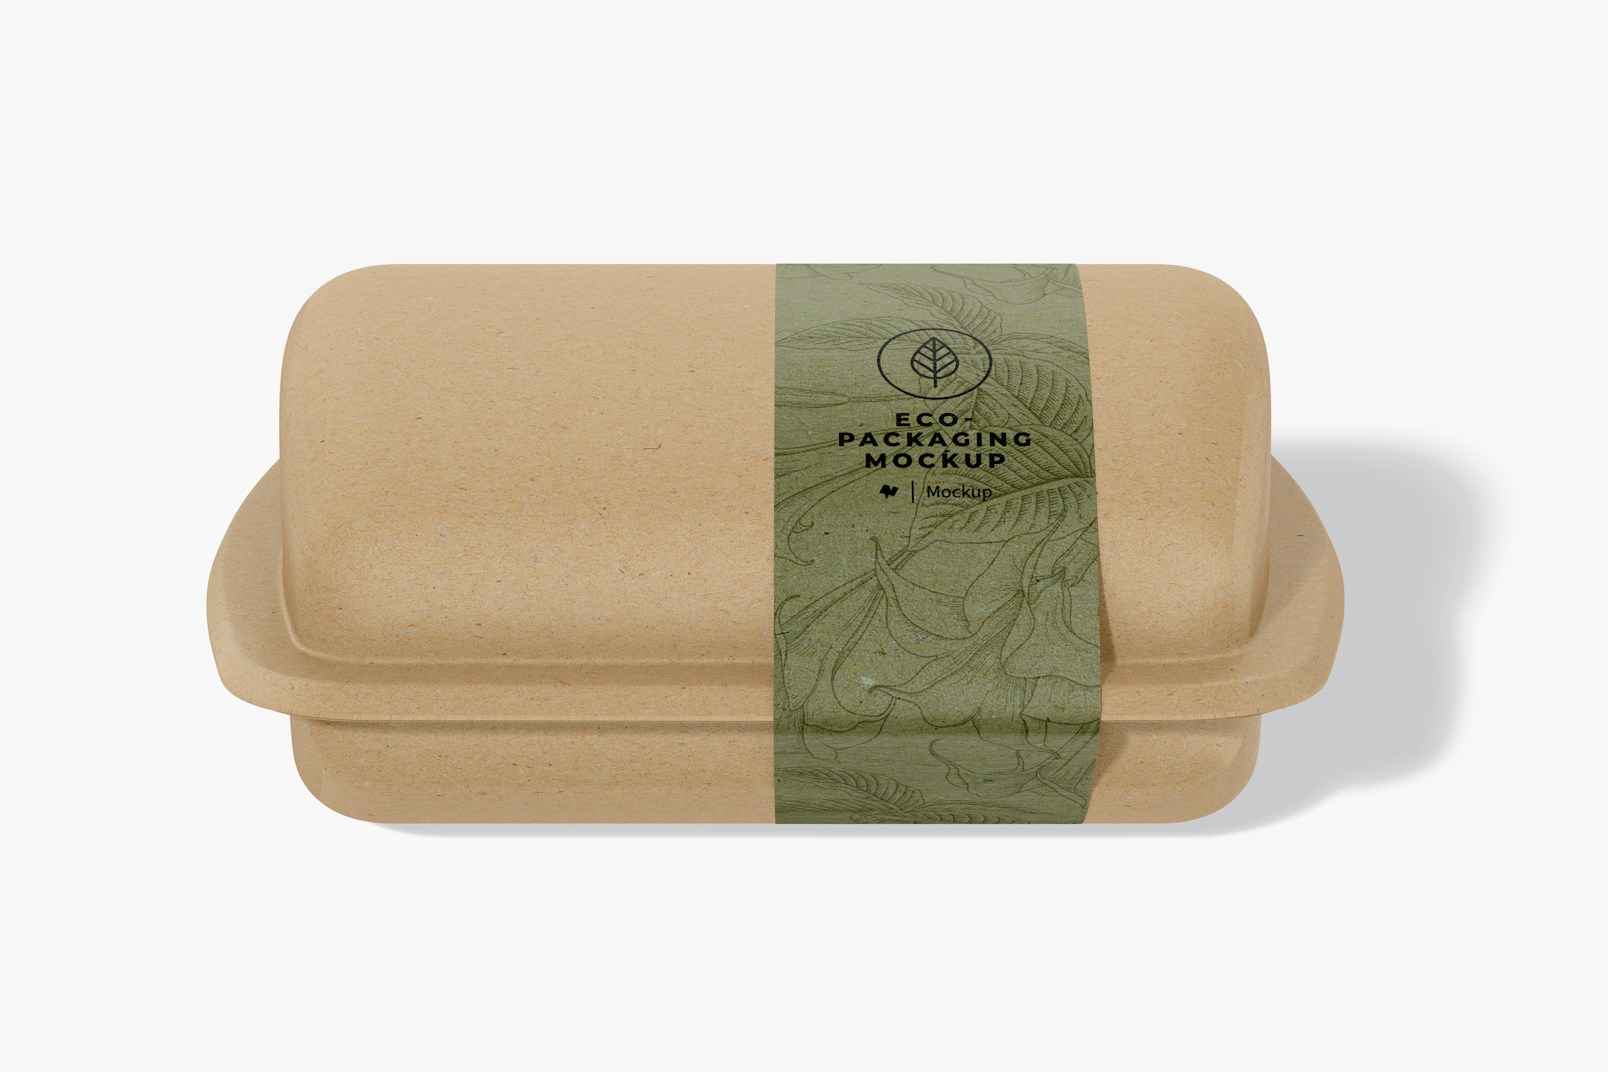 Small Biodegradable Food Packaging Mockup, Front View